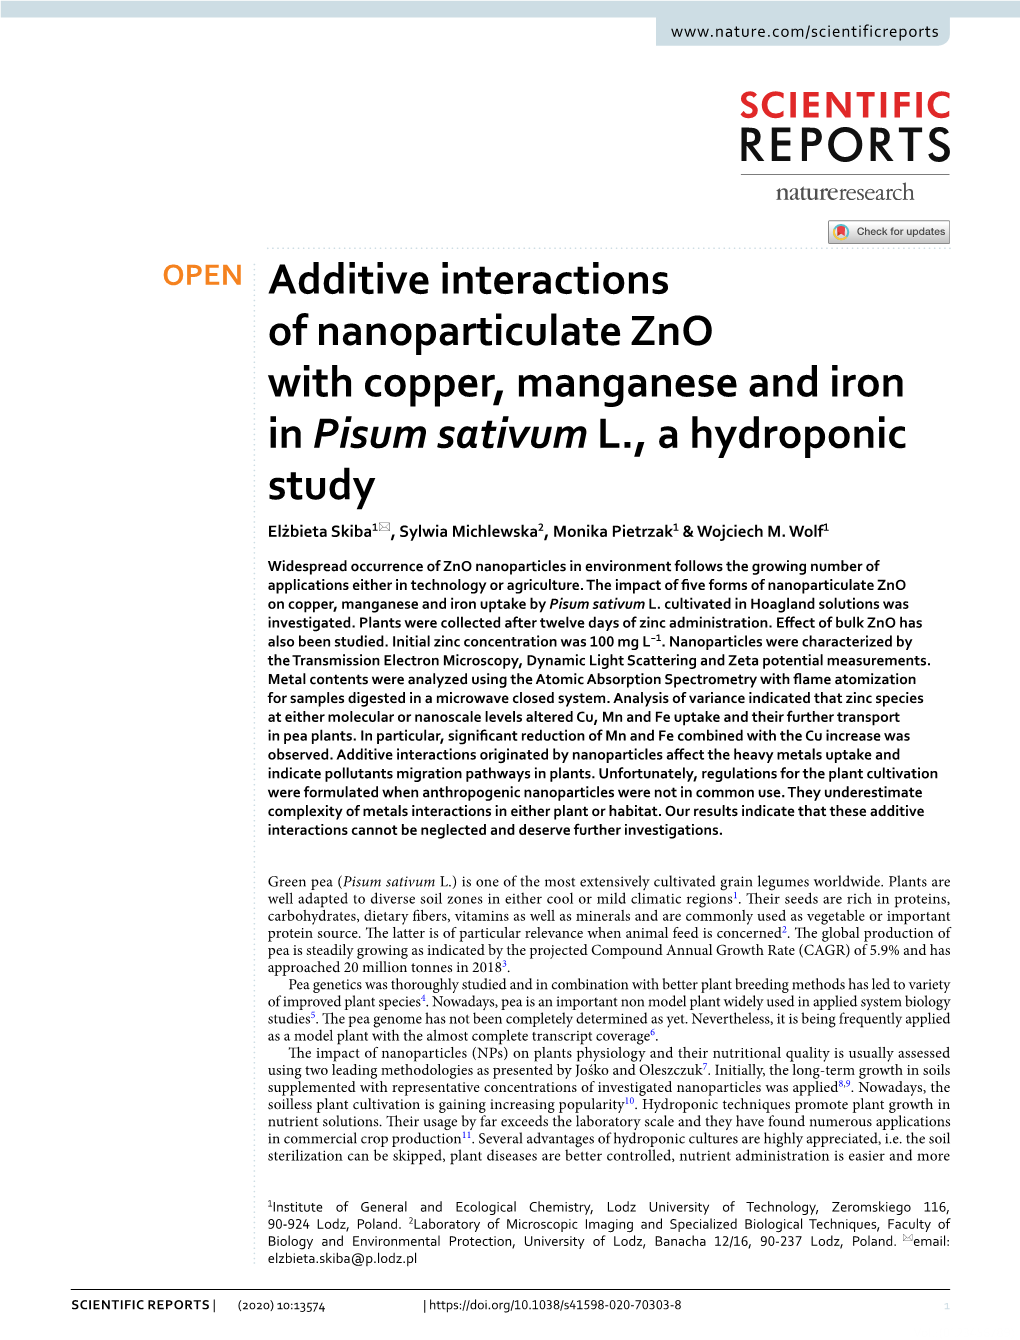 Additive Interactions of Nanoparticulate Zno with Copper